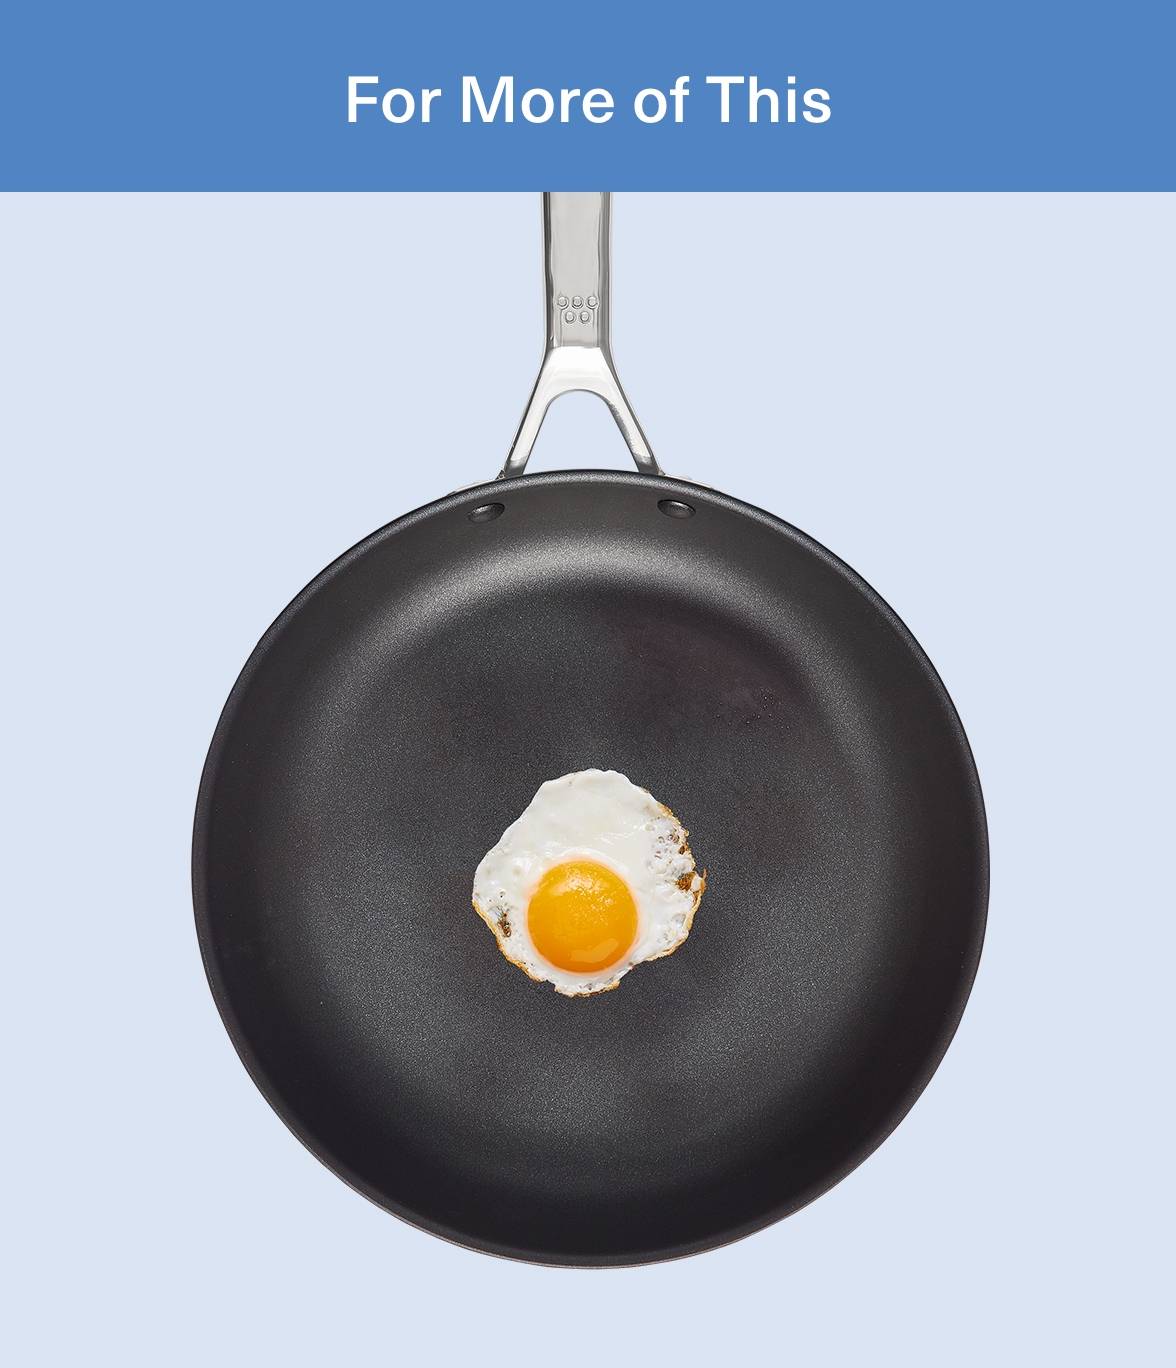 A bird’s eye view of a Misen Nonstick Pan with a fried egg in it. A caption reads “For More of This.”